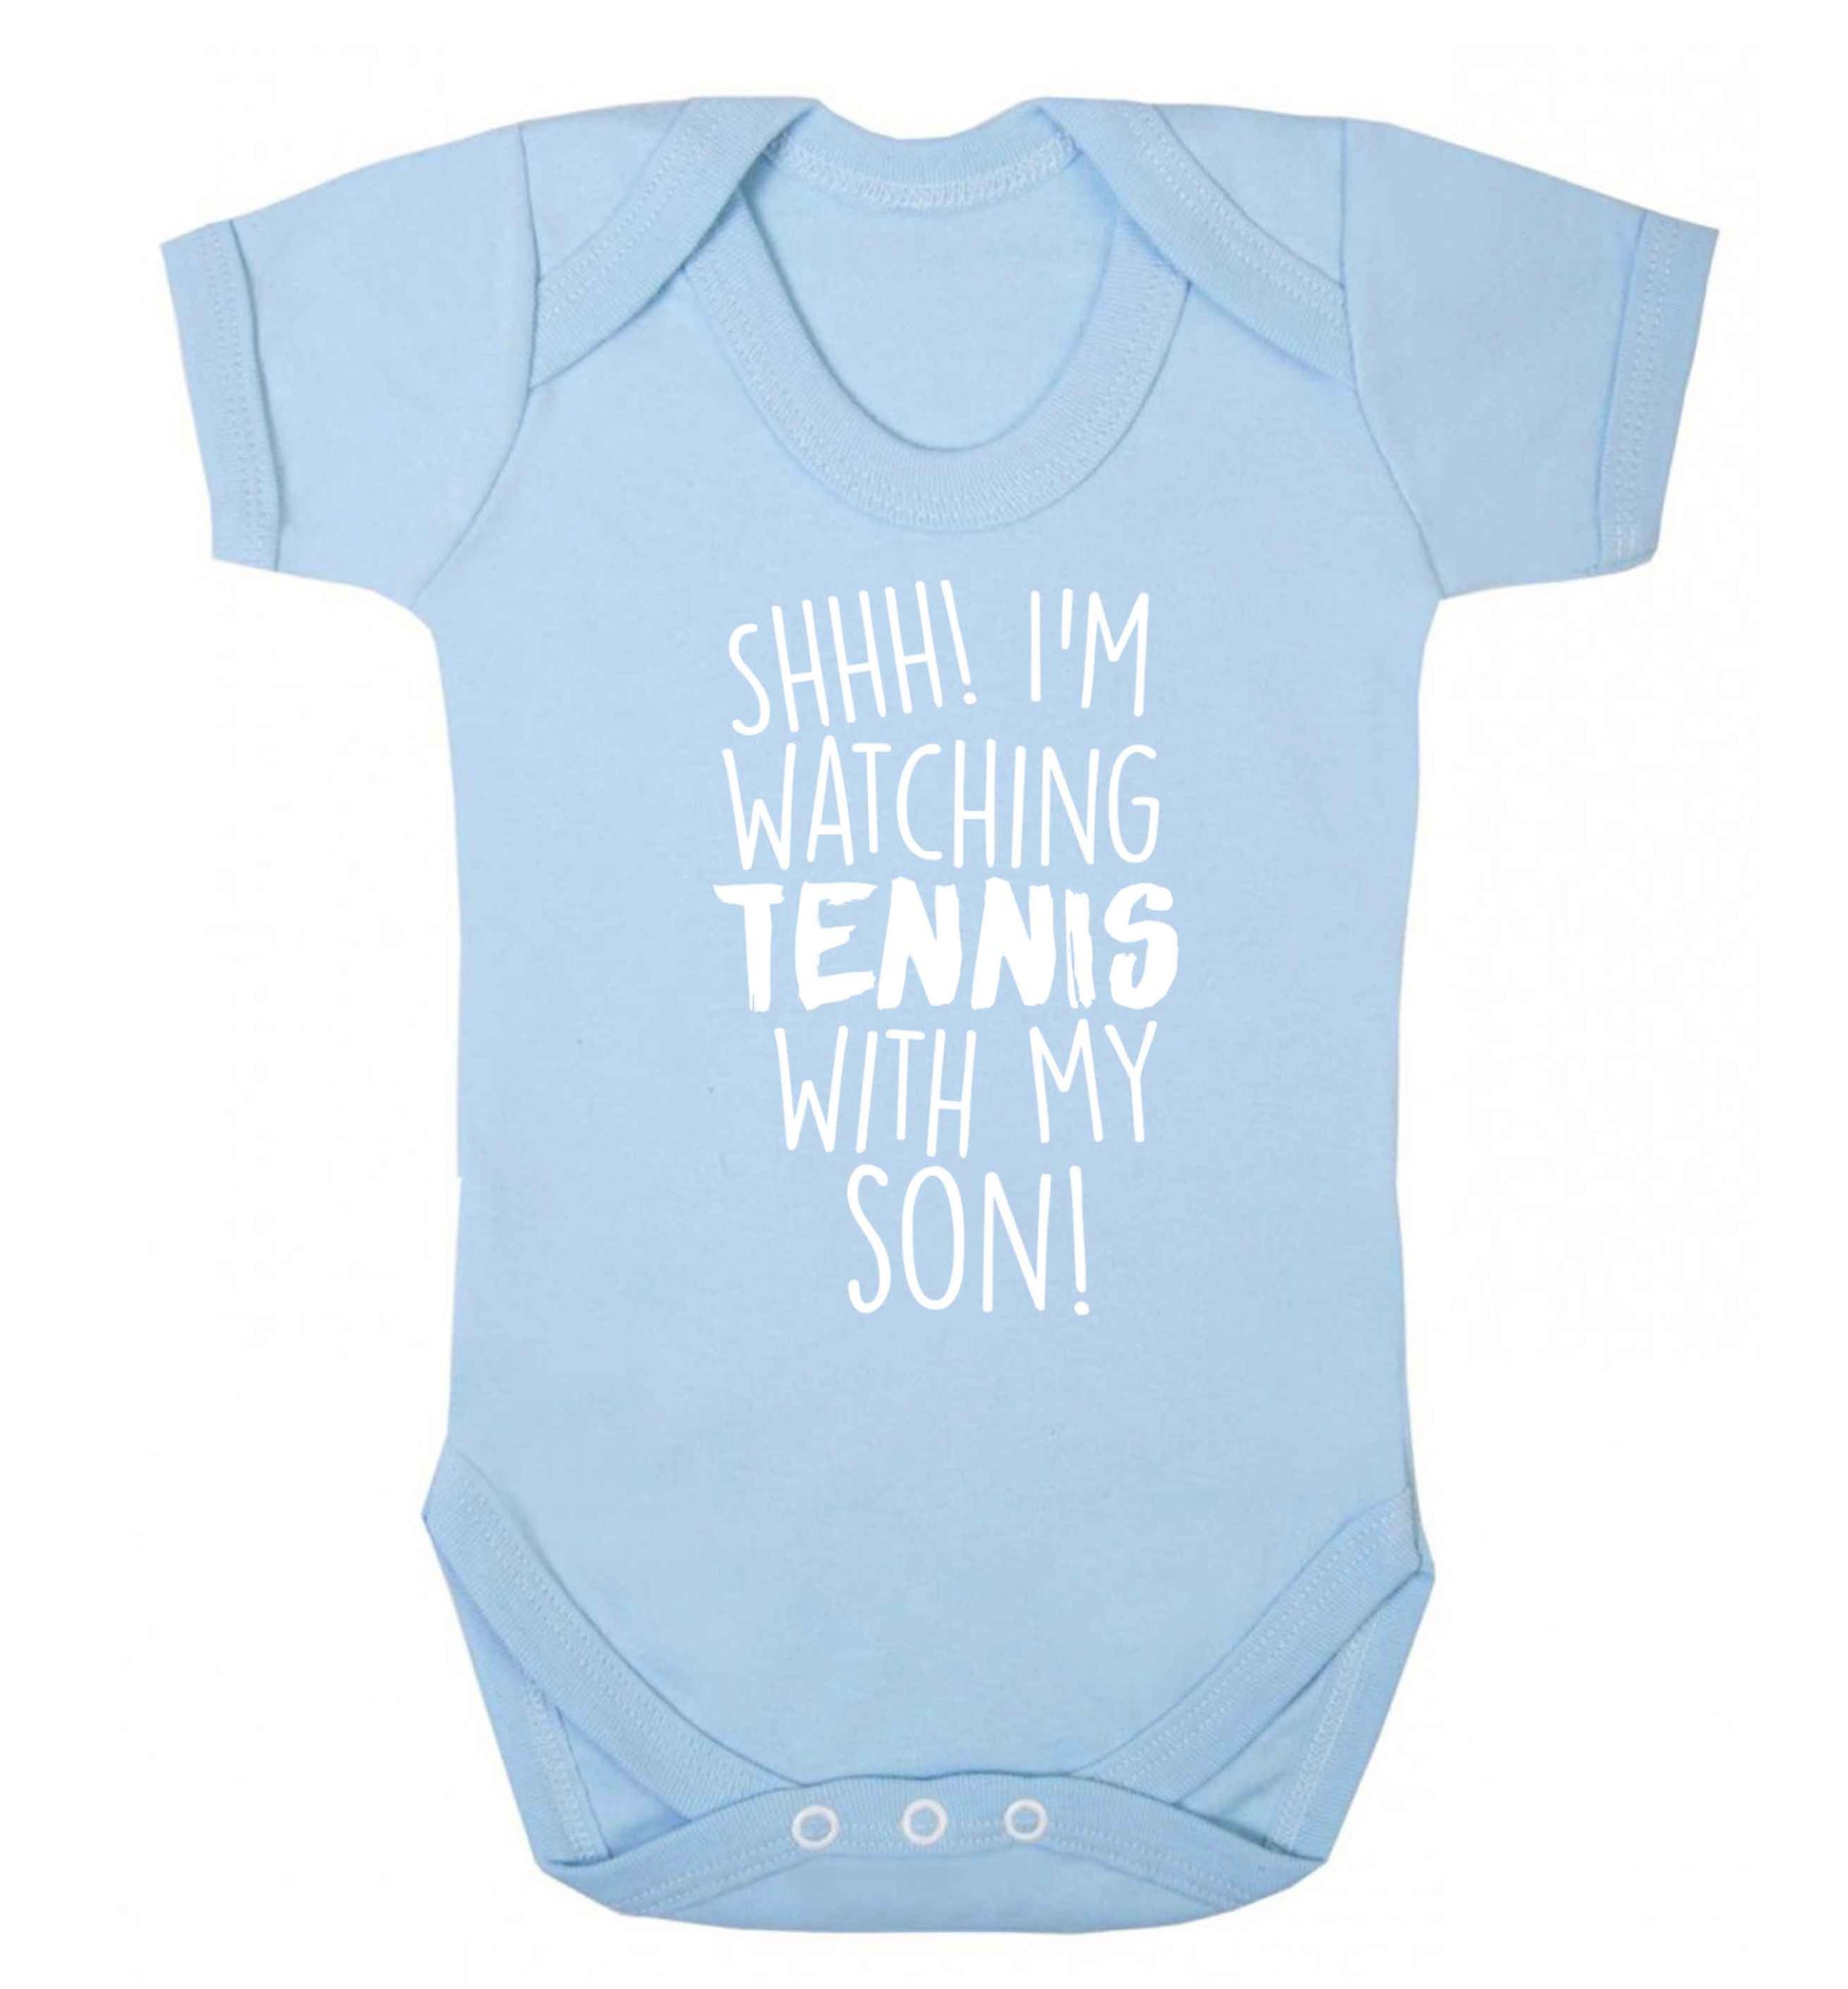 Shh! I'm watching tennis with my son! Baby Vest pale blue 18-24 months